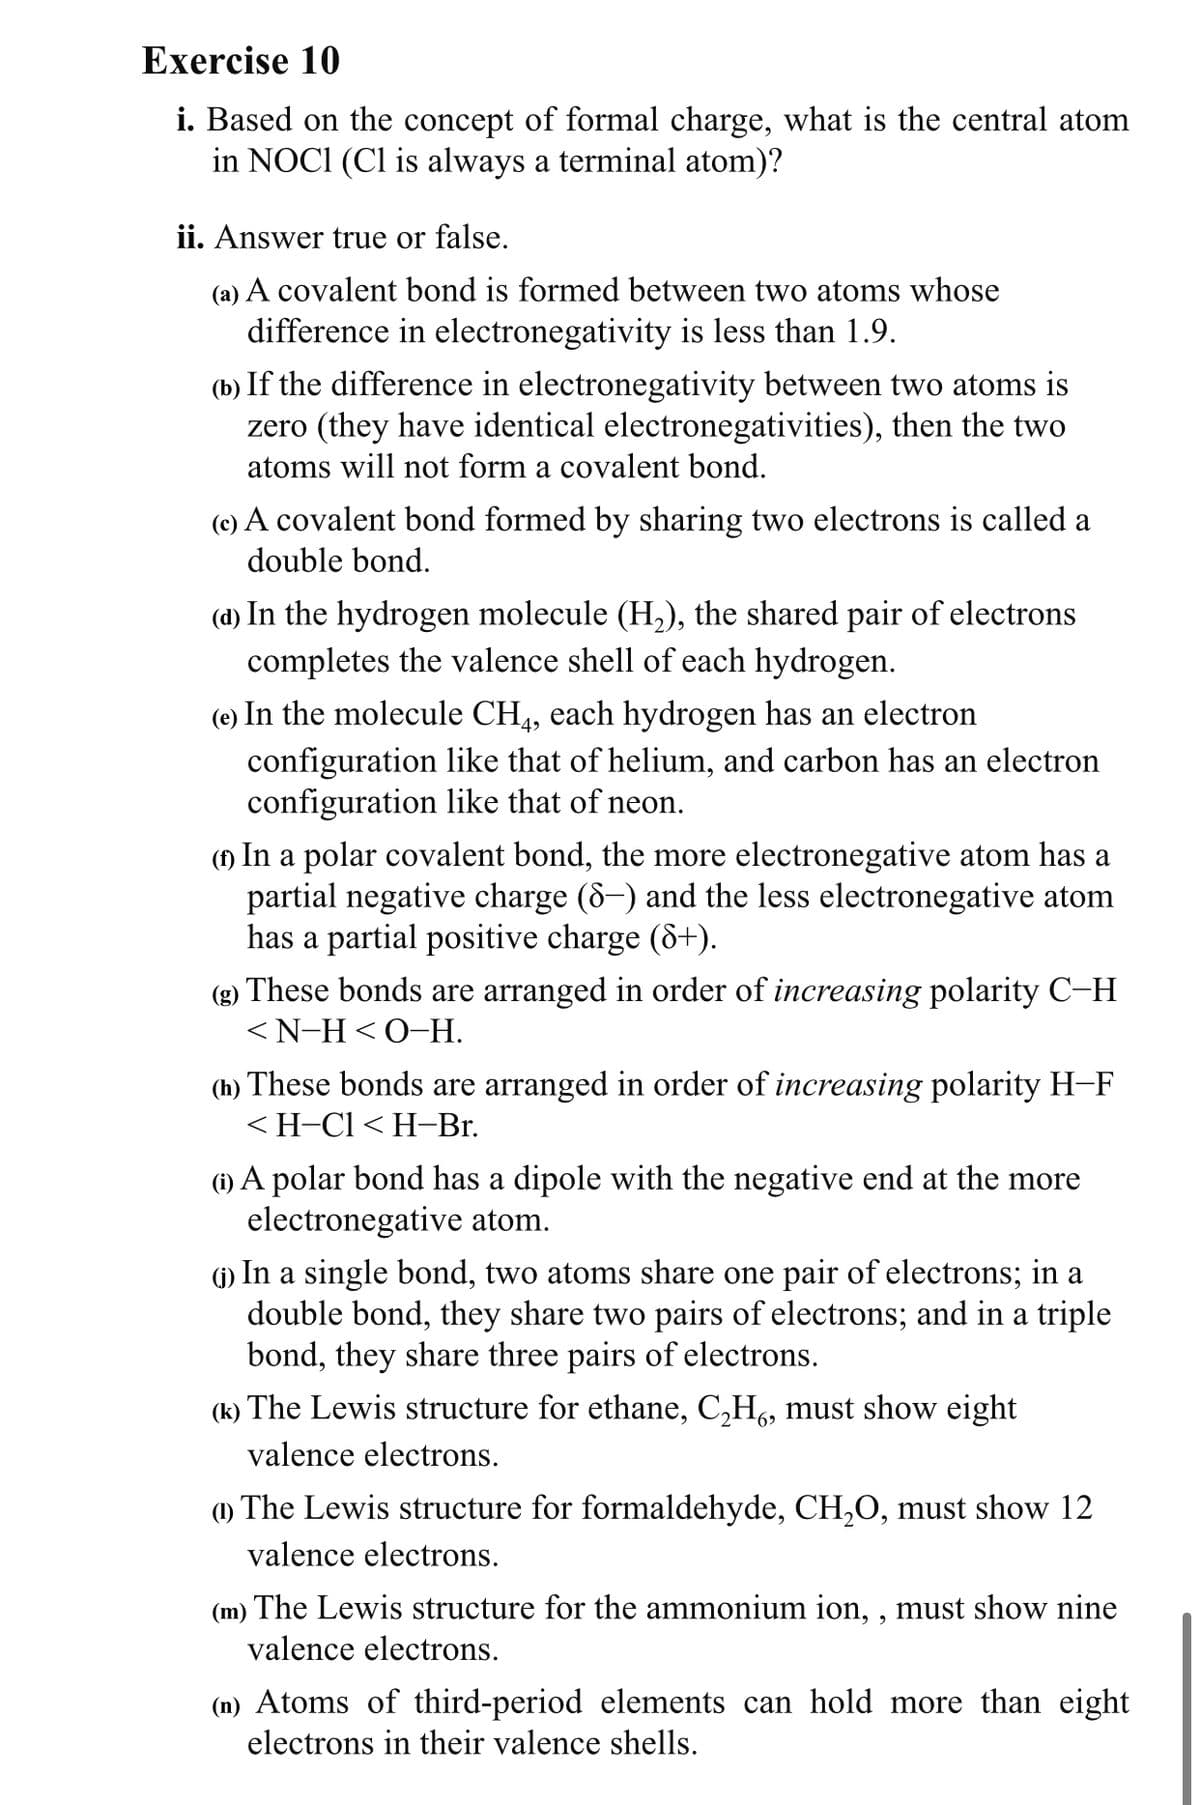 Exercise 10
i. Based on the concept of formal charge, what is the central atom
in NOCI (Cl is always a terminal atom)?
ii. Answer true or false.
(a) A covalent bond is formed between two atoms whose
difference in electronegativity is less than 1.9.
(b) If the difference in electronegativity between two atoms is
zero (they have identical electronegativities), then the two
atoms will not form a covalent bond.
(e) A covalent bond formed by sharing two electrons is called a
double bond.
(d) In the hydrogen molecule (H,), the shared pair of electrons
completes the valence shell of each hydrogen.
(e) In the molecule CH4, each hydrogen has an electron
configuration like that of helium, and carbon has an electron
configuration like that of neon.
(1) In a polar covalent bond, the more electronegative atom has a
partial negative charge (8-) and the less electronegative atom
has a partial positive charge (&+).
(g) These bonds are arranged in order of increasing polarity C-H
<N-H<O-H.
(h) These bonds are arranged in order of increasing polarity H-F
<H-Cl < H-Br.
(1) A polar bond has a dipole with the negative end at the more
electronegative atom.
(1) In a single bond, two atoms share one pair of electrons; in a
double bond, they share two pairs of electrons; and in a triple
bond, they share three pairs of electrons.
(k) The Lewis structure for ethane, C,H6, must show eight
valence electrons.
(1) The Lewis structure for formaldehyde, CH,O, must show 12
valence electrons.
(m) The Lewis structure for the ammonium ion, , must show nine
valence electrons.
(n) Atoms of third-period elements can hold more than eight
electrons in their valence shells.
